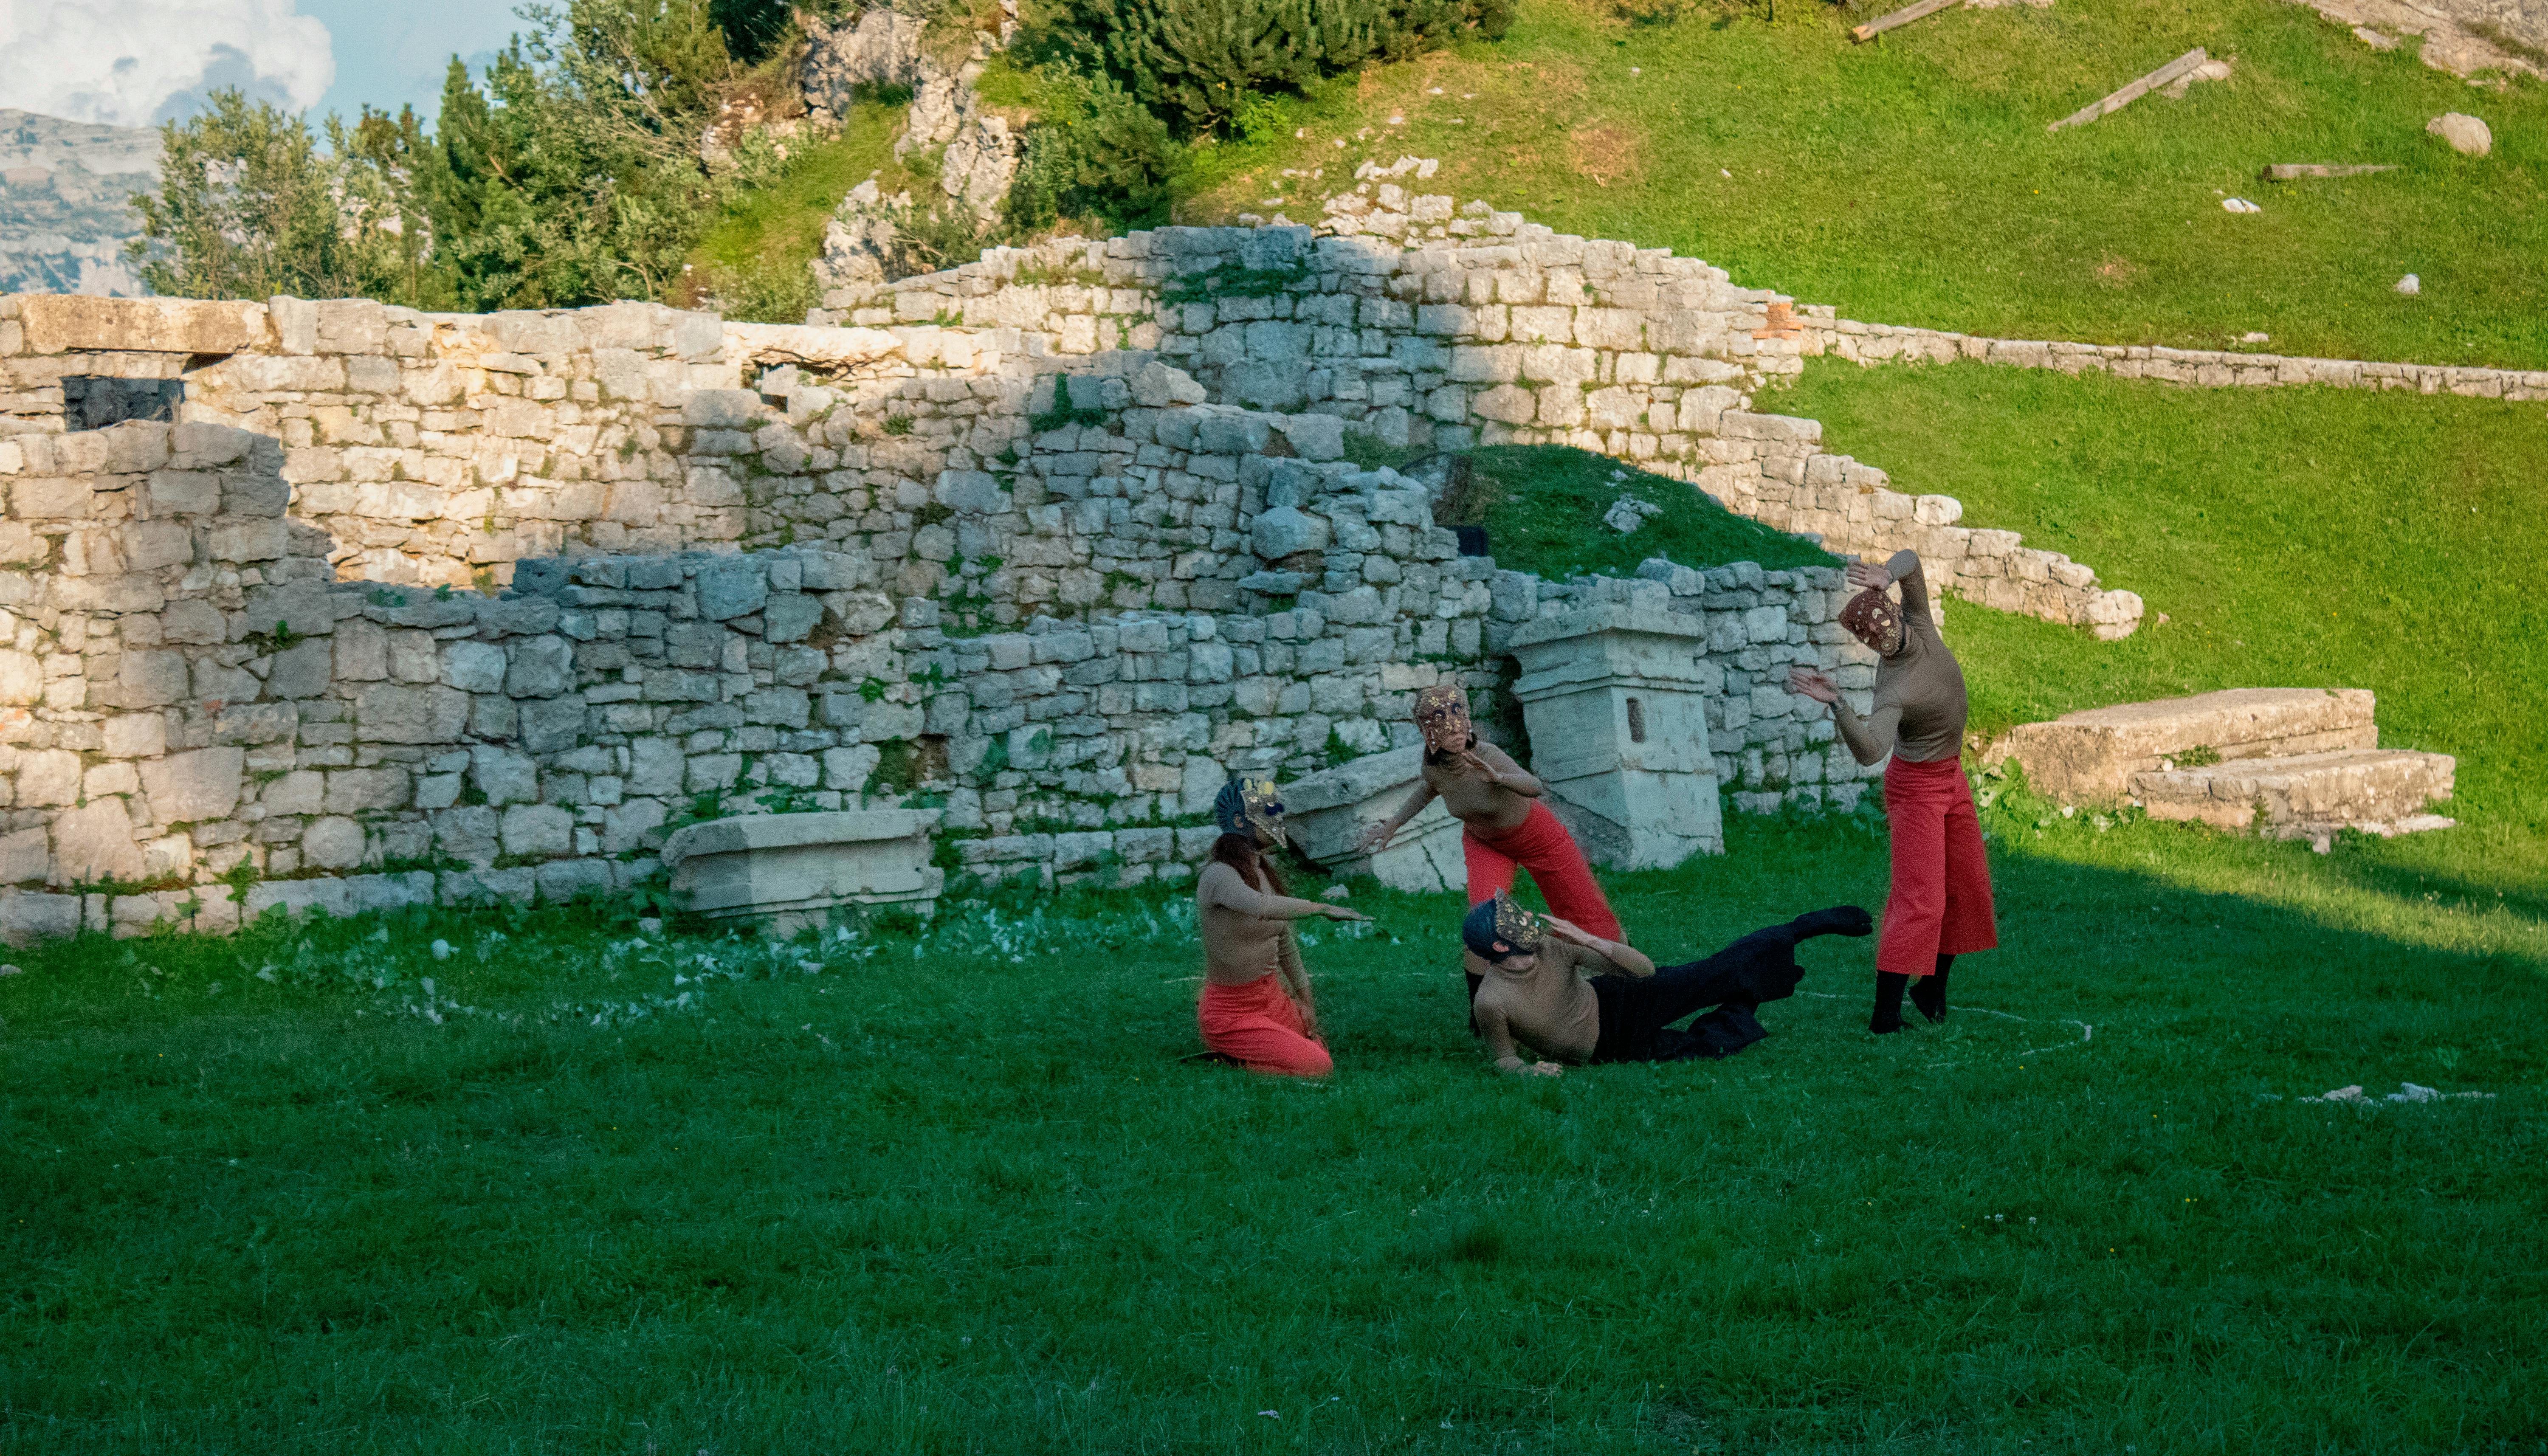 Four performers dance on a lawn; they wear soft pants, flesh-colored shirts, and masks over their faces. Behind them can be seen stone ruins and the slope of a hill. It's daytime.